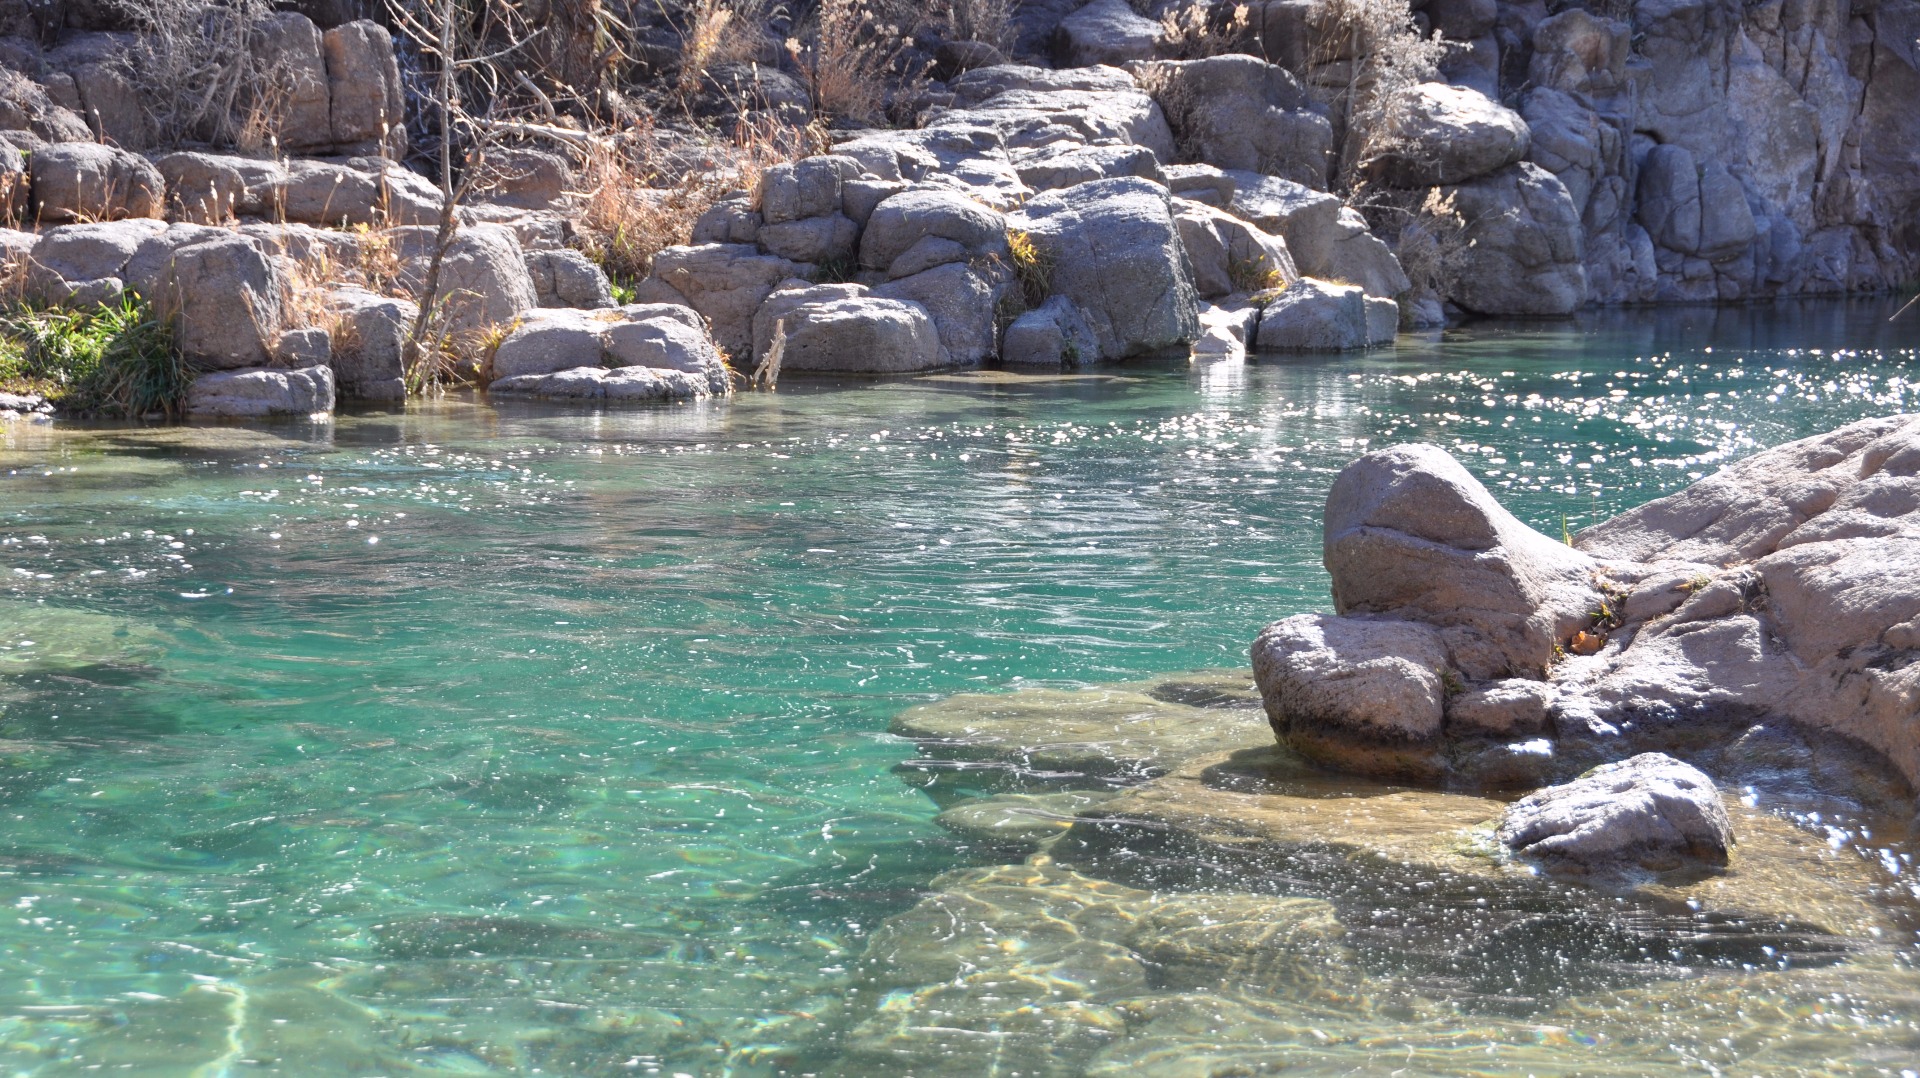 How to get a permit to Fossil Creek